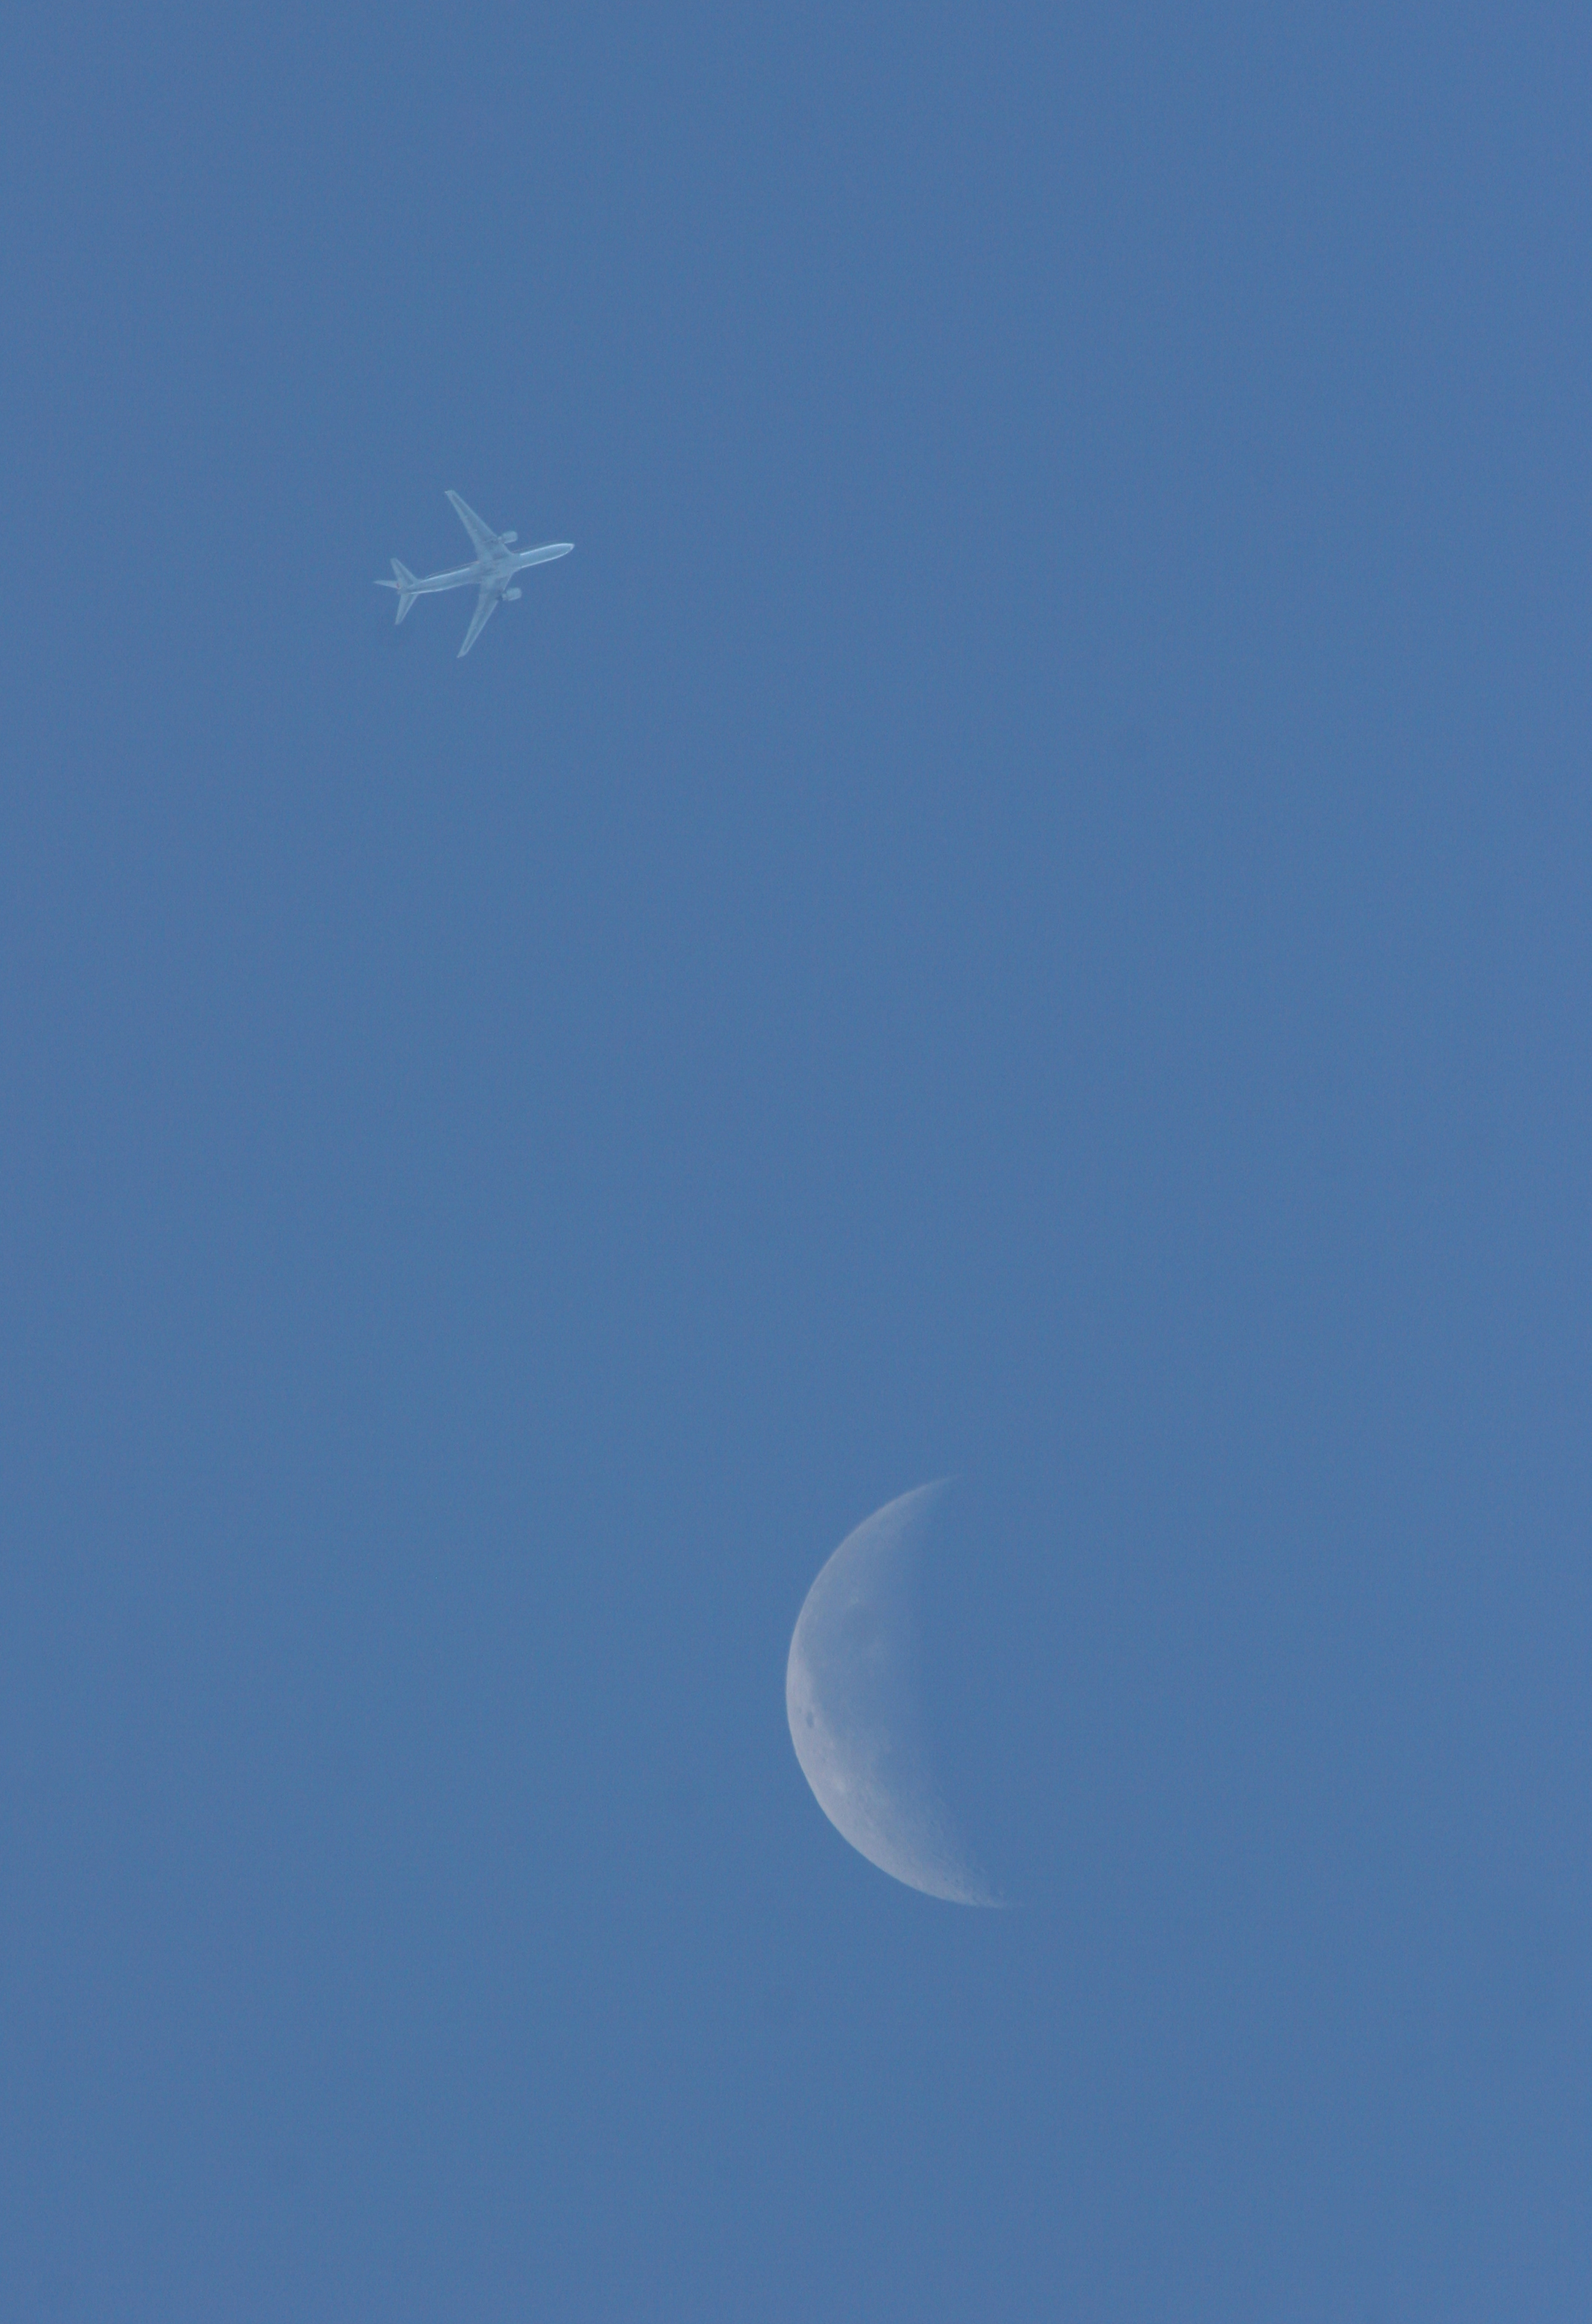 Moon with plane